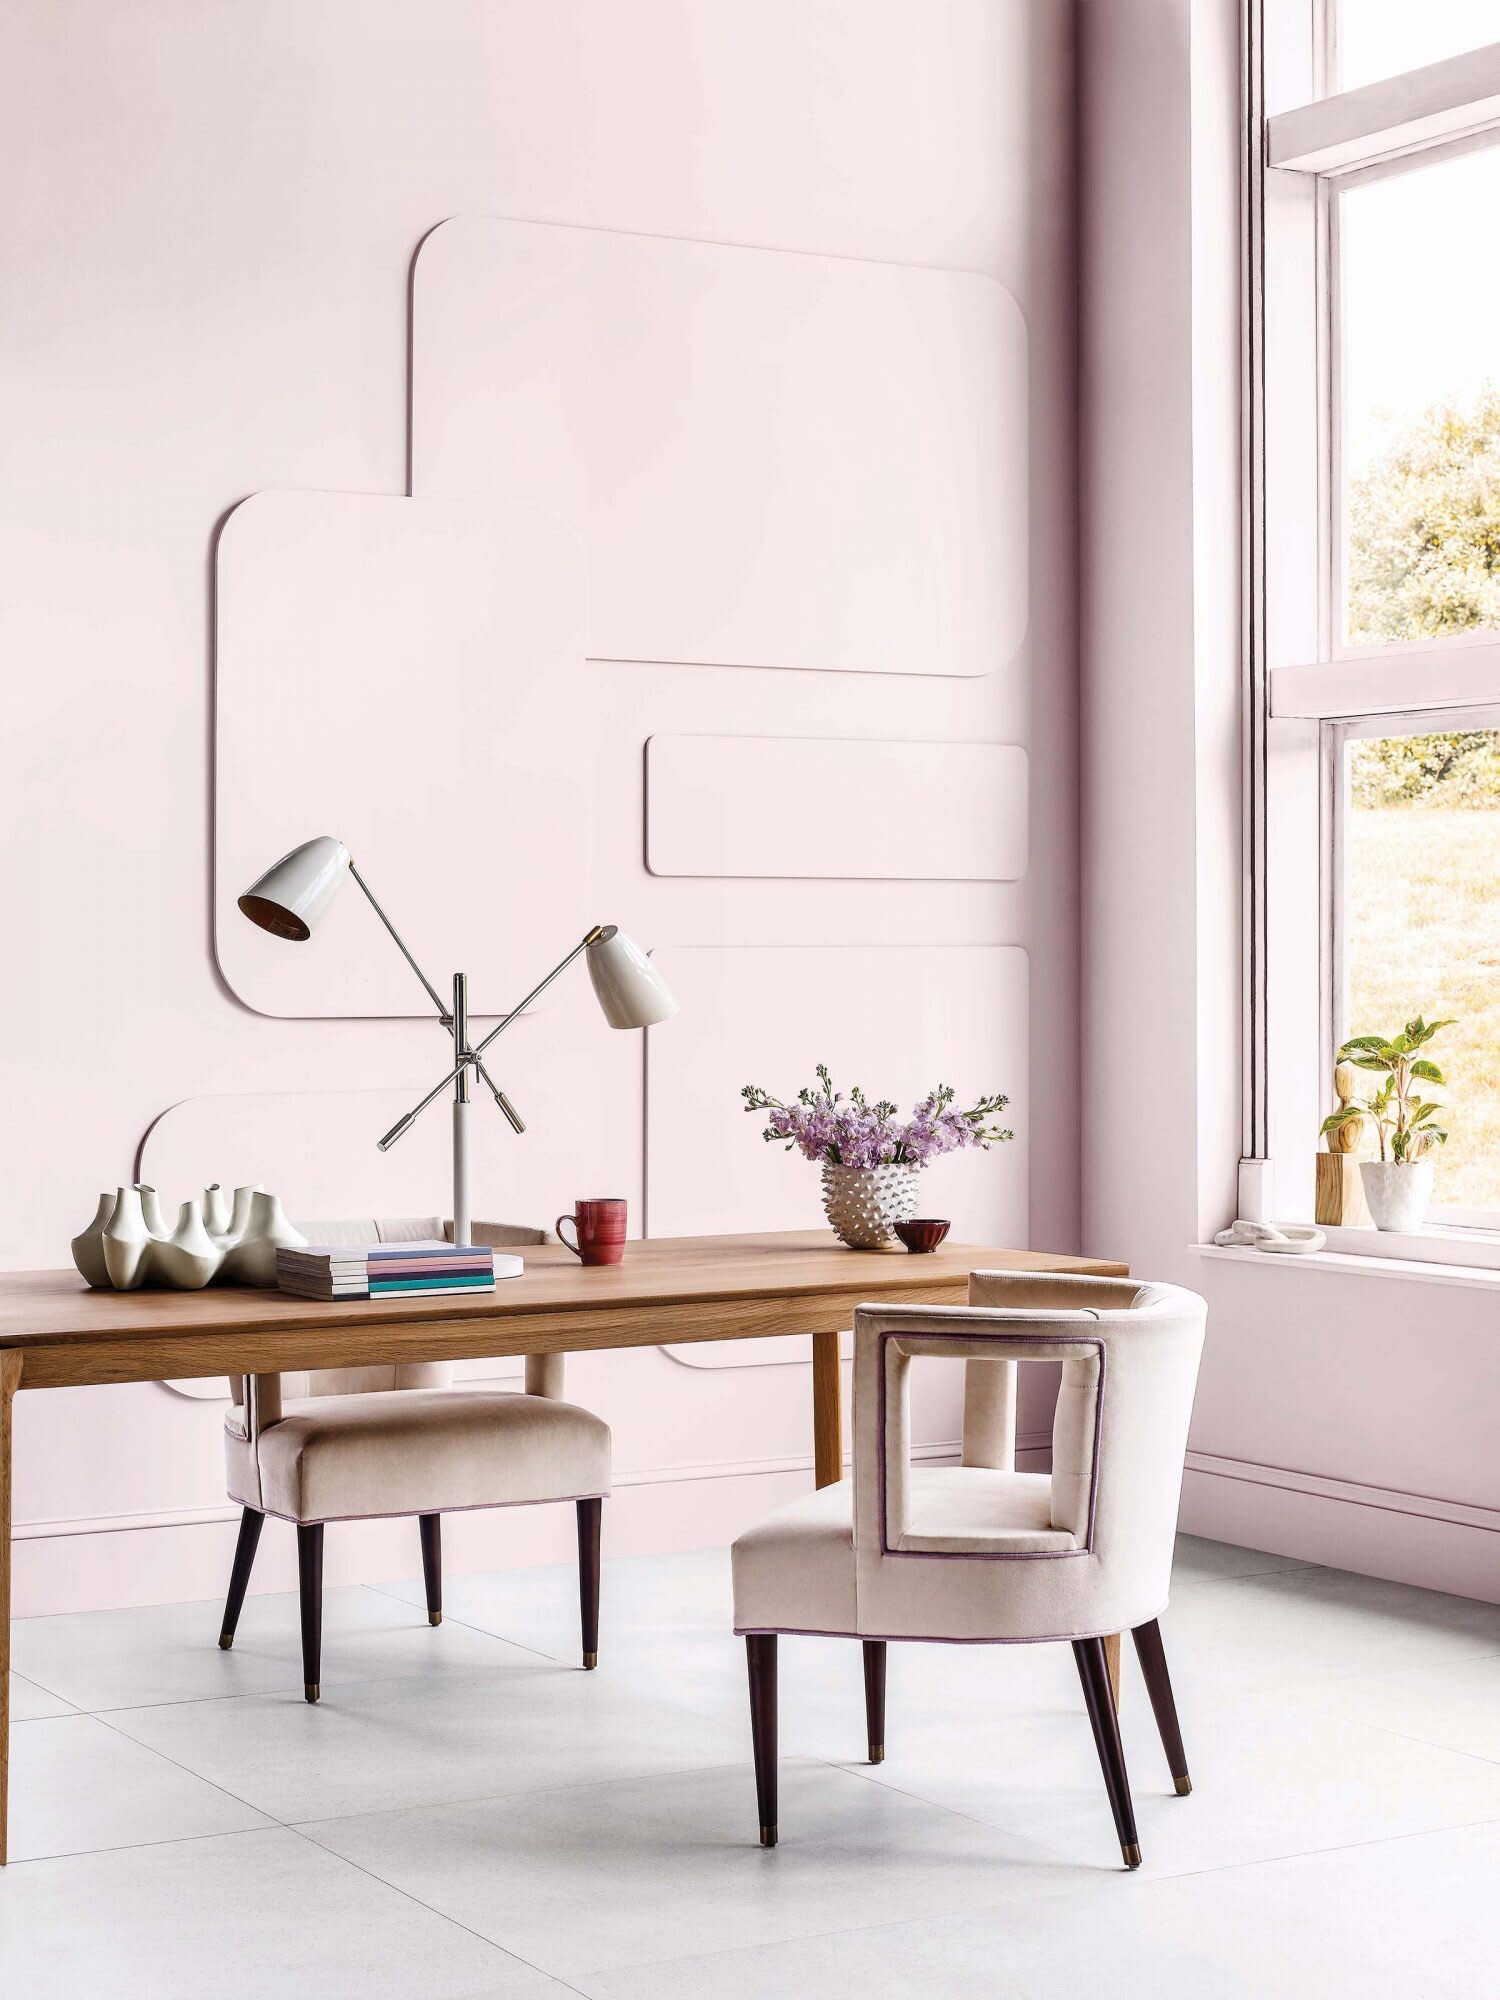 Sherwin-Williams Predicts These Paint Colors Will Be Huge in 2022